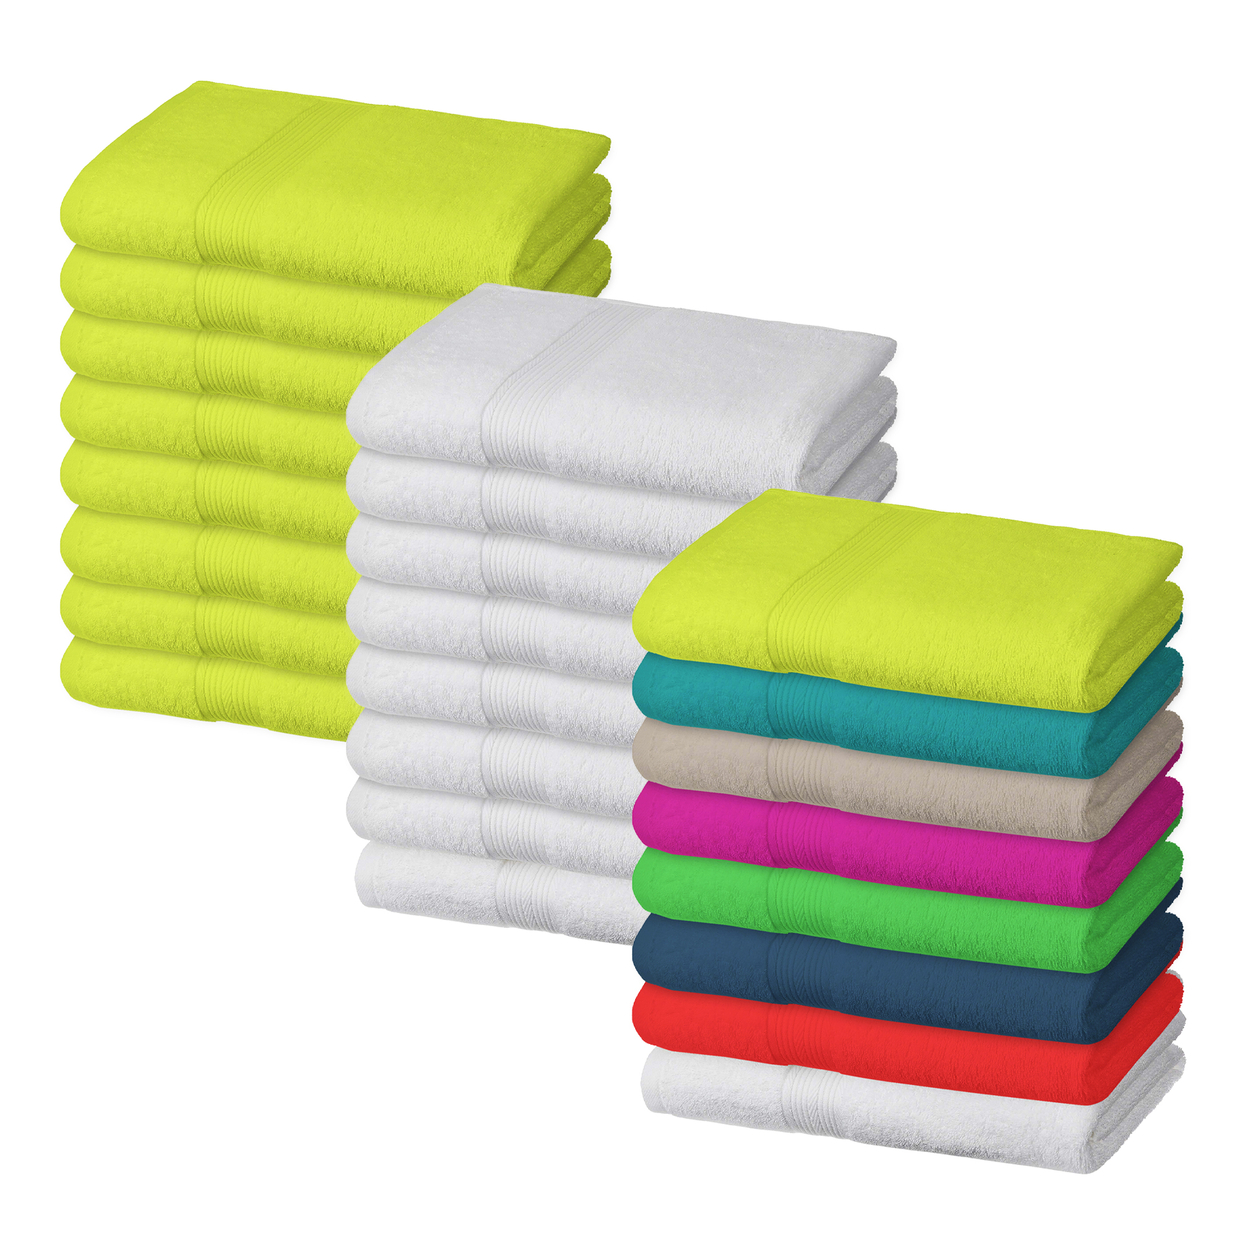 4-Pack: Super Absorbent 100% Cotton 54 X 27 Hotel Beach Bath Towels - Assorted